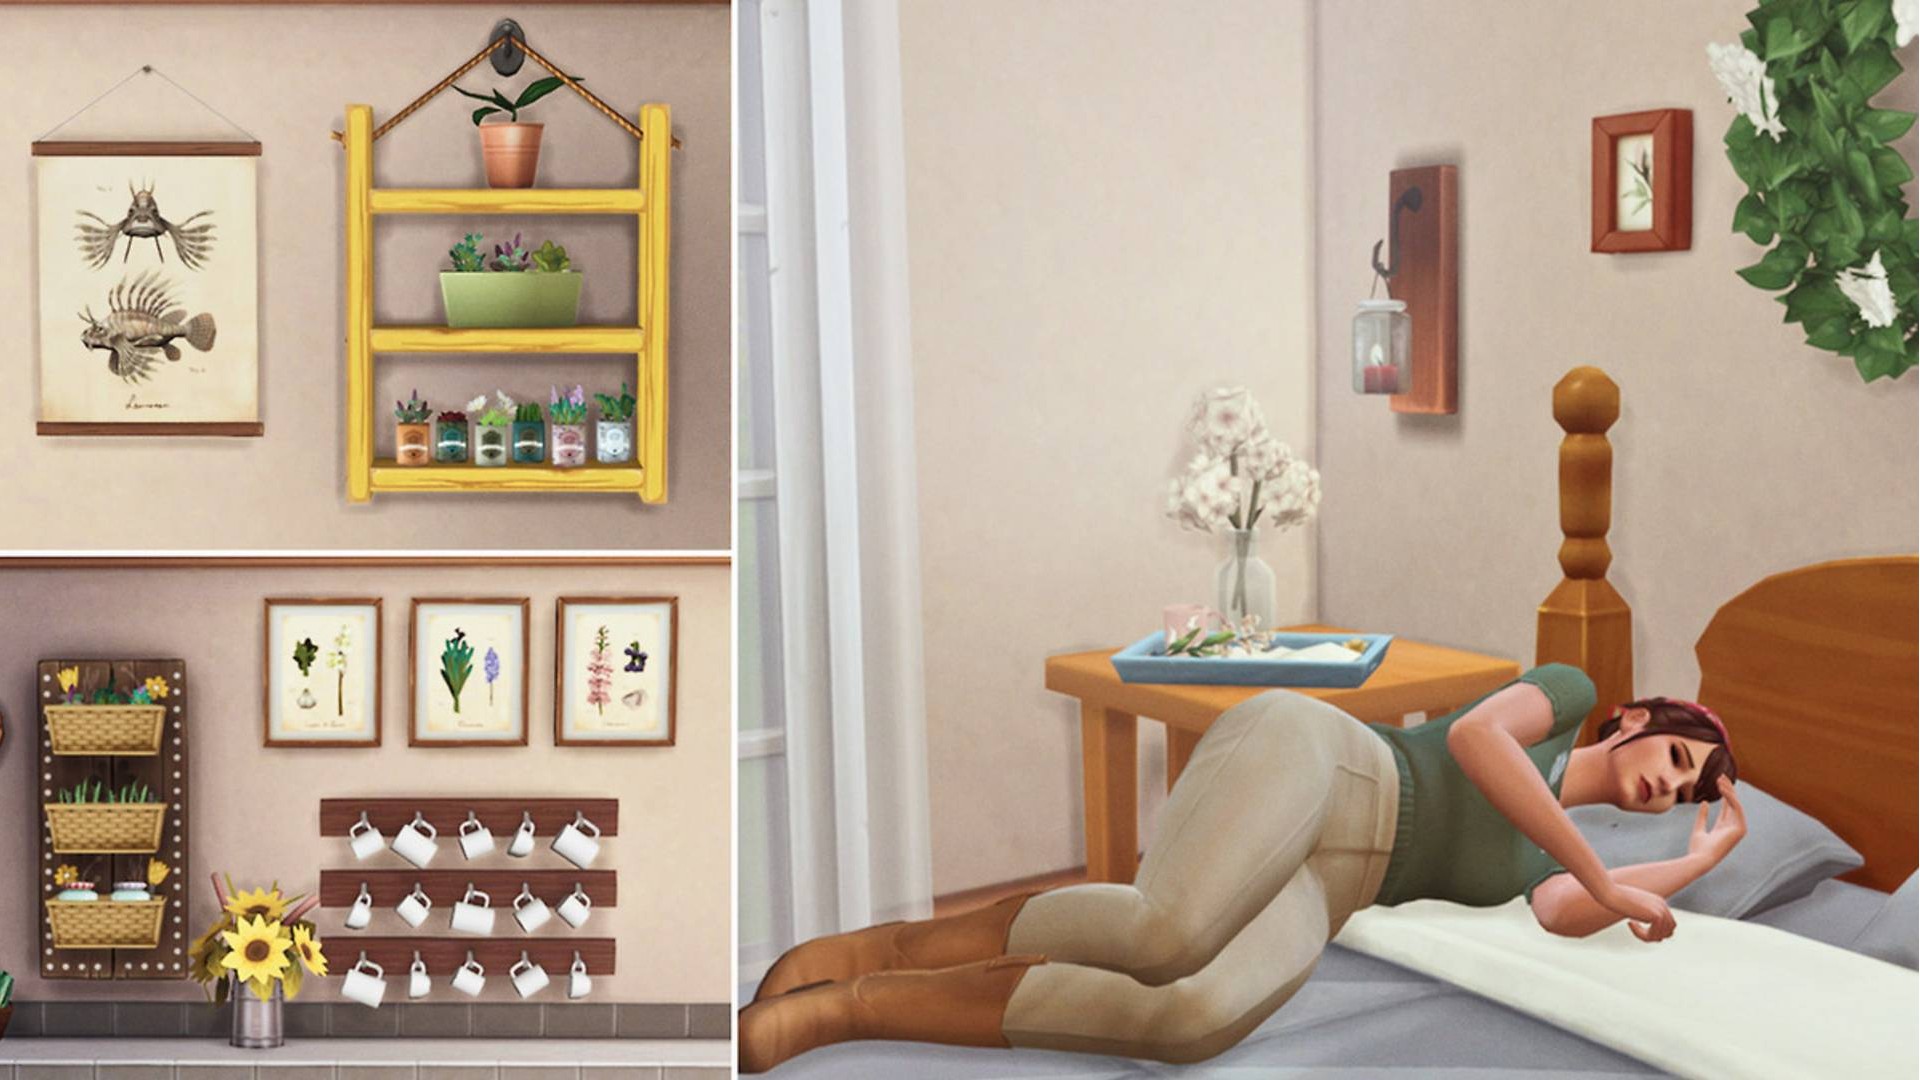 Our favorite Sims 4 CC finds right now